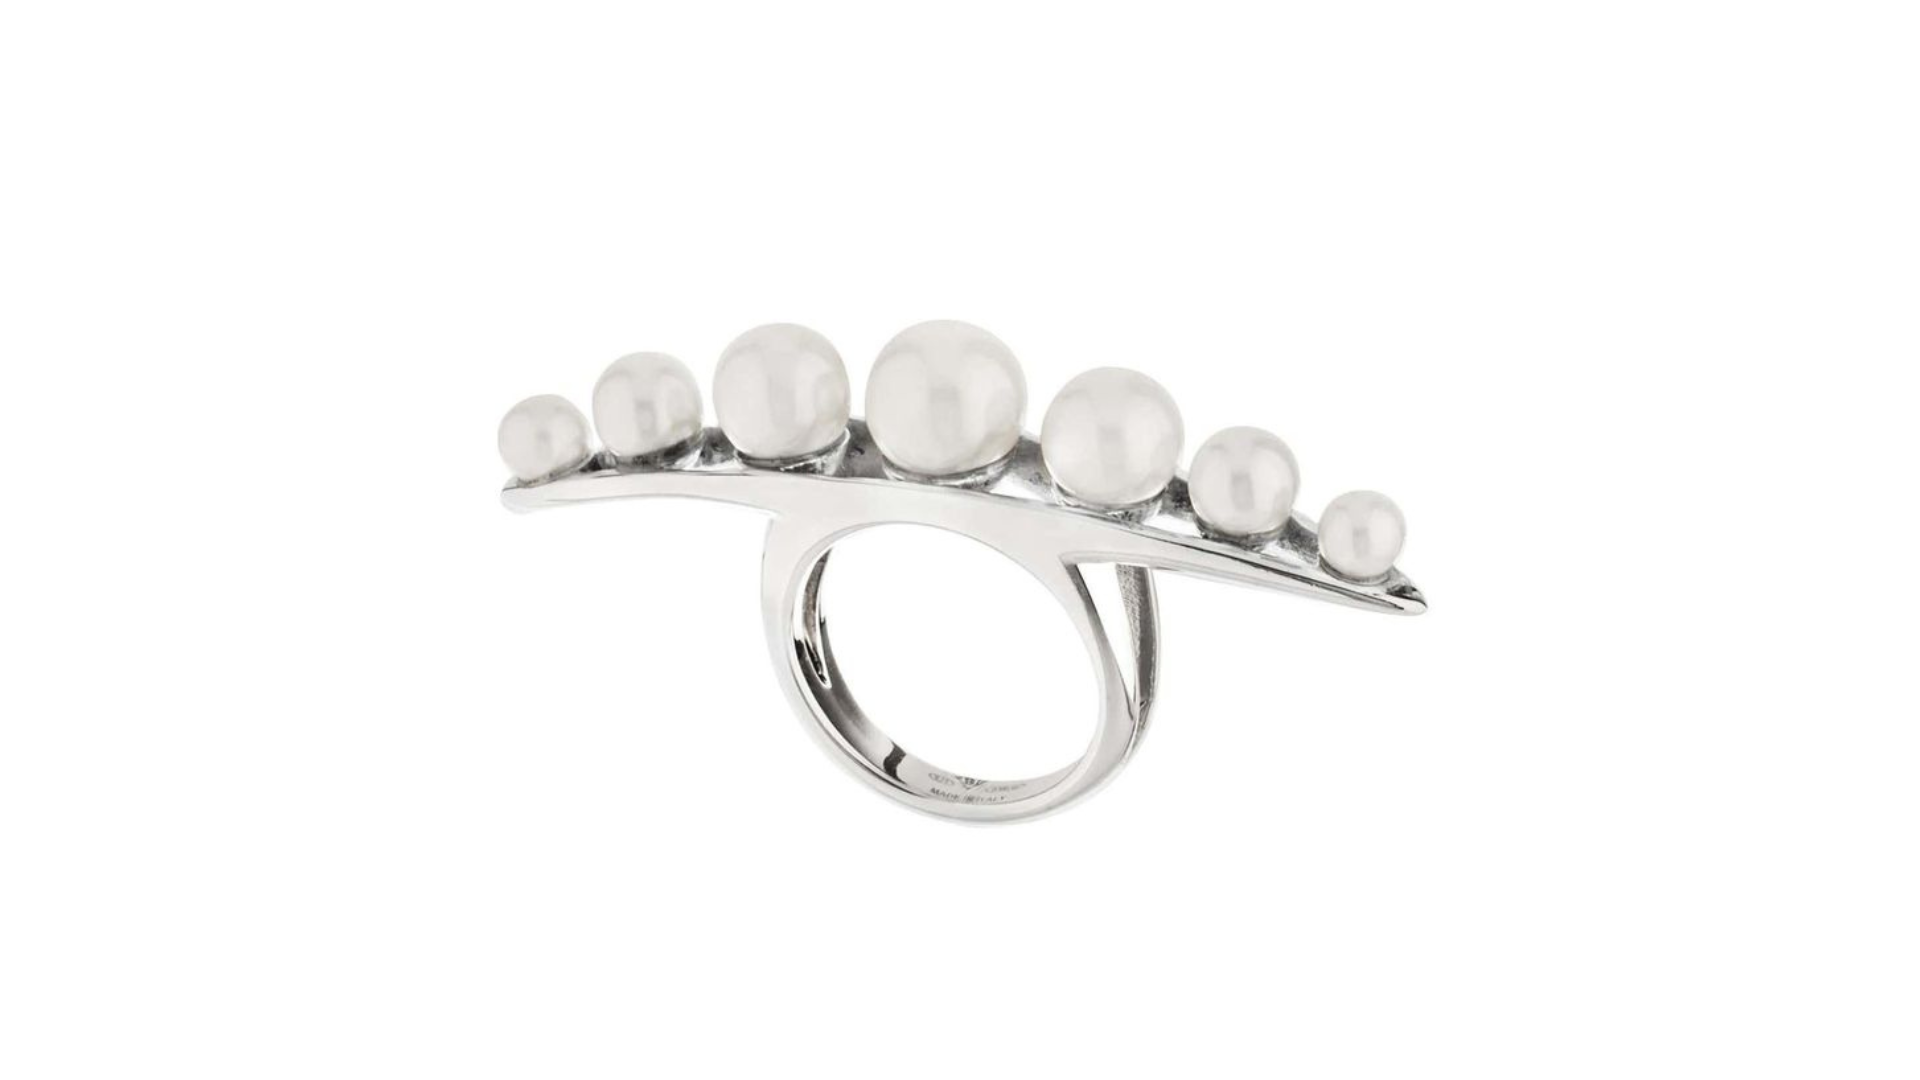 A silver Massage Ring with pearls